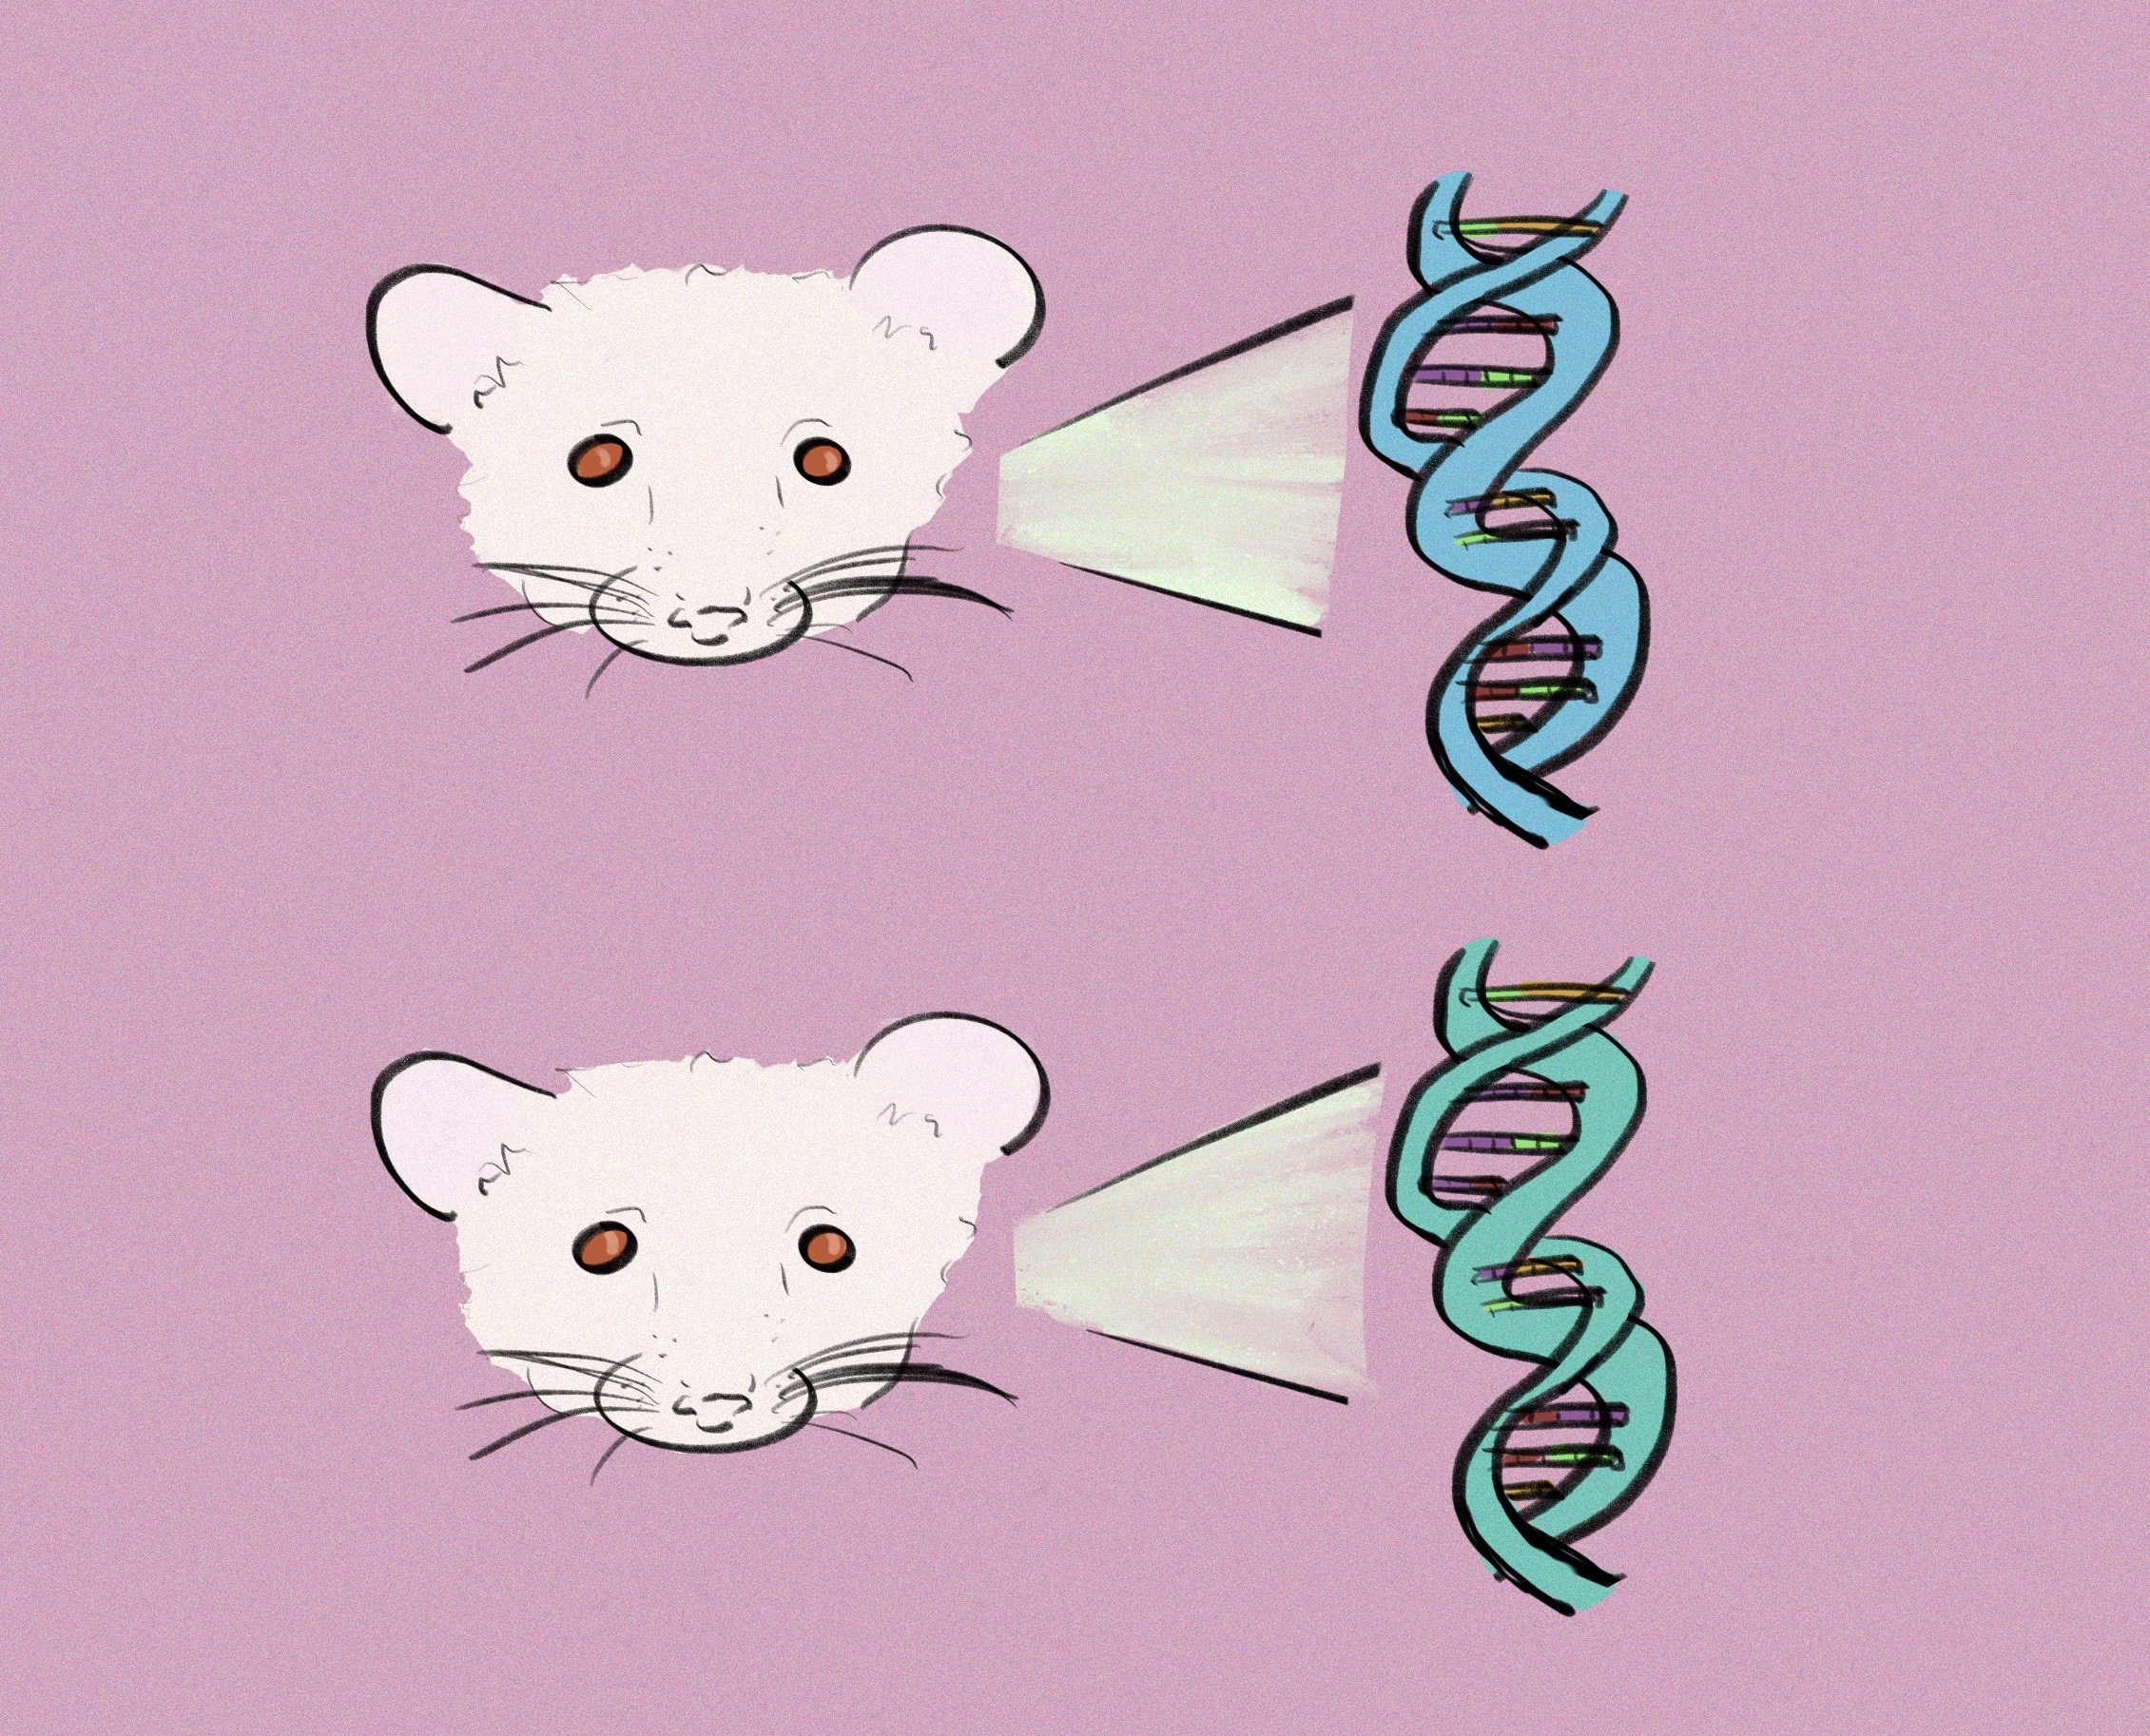 Genetic backgrounds of mice